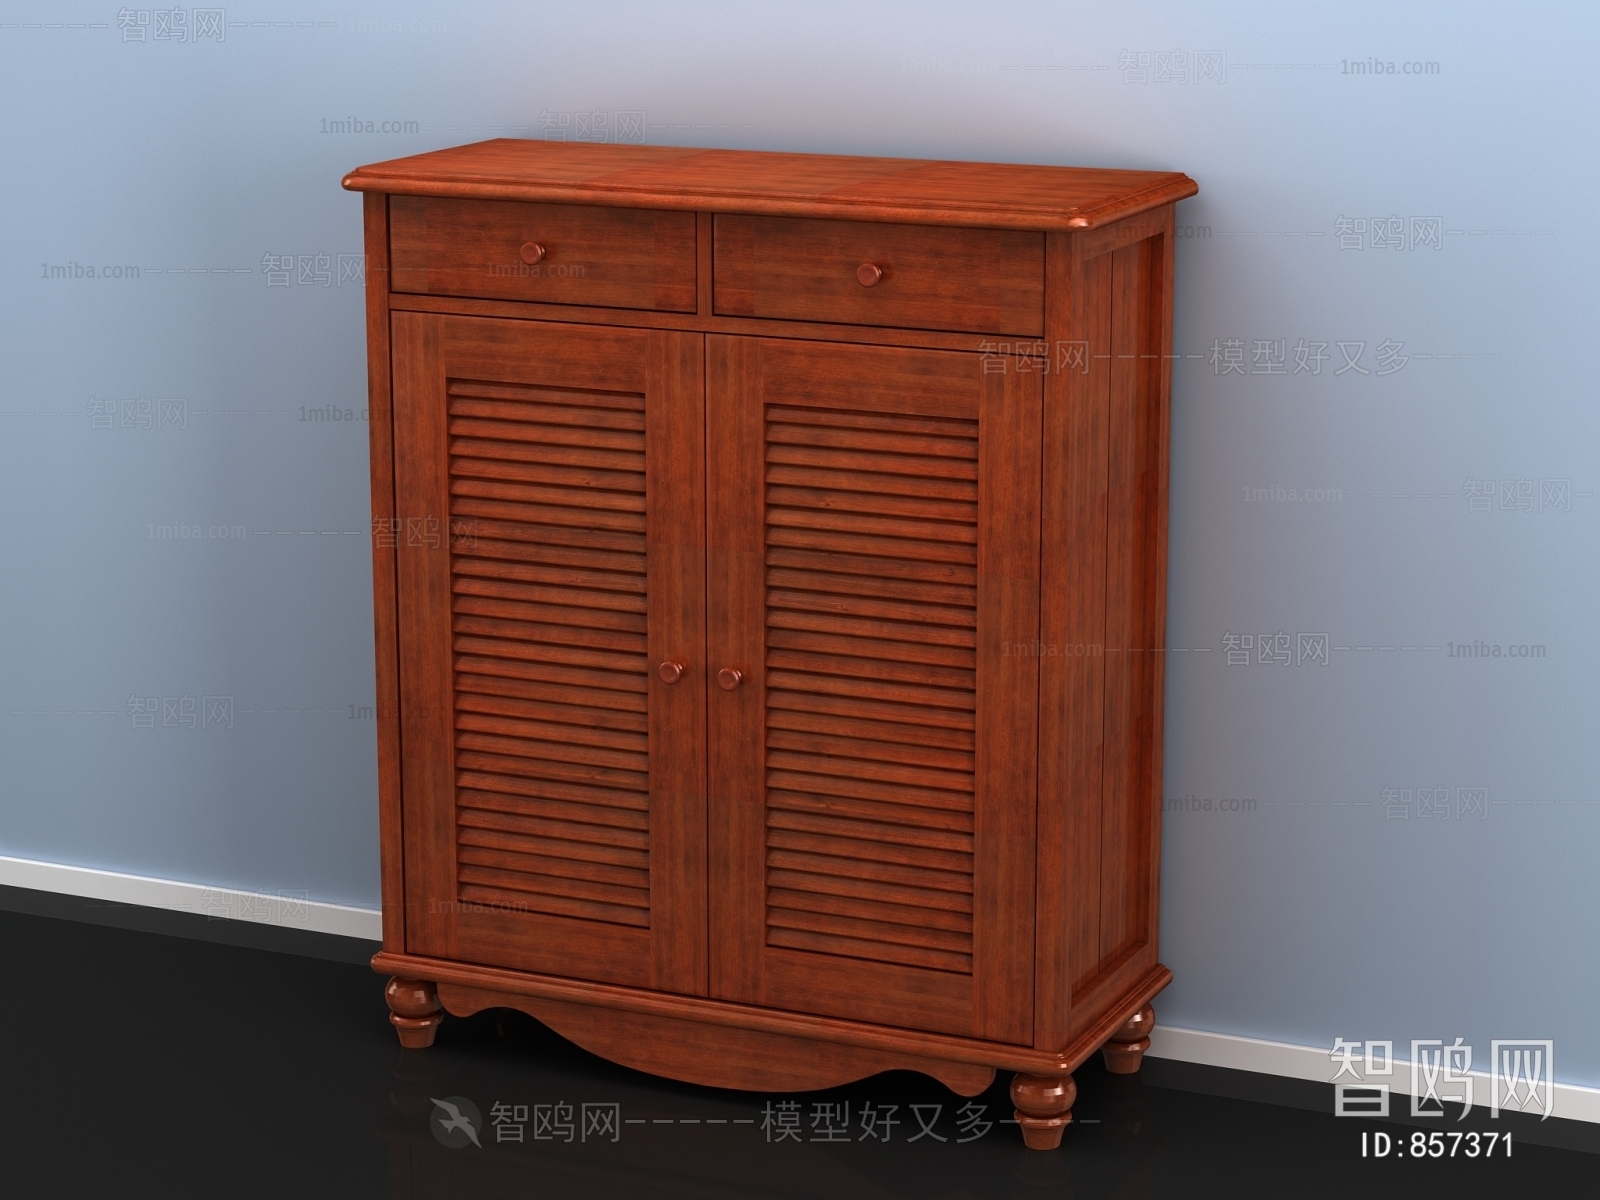 New Classical Style Shoe Cabinet